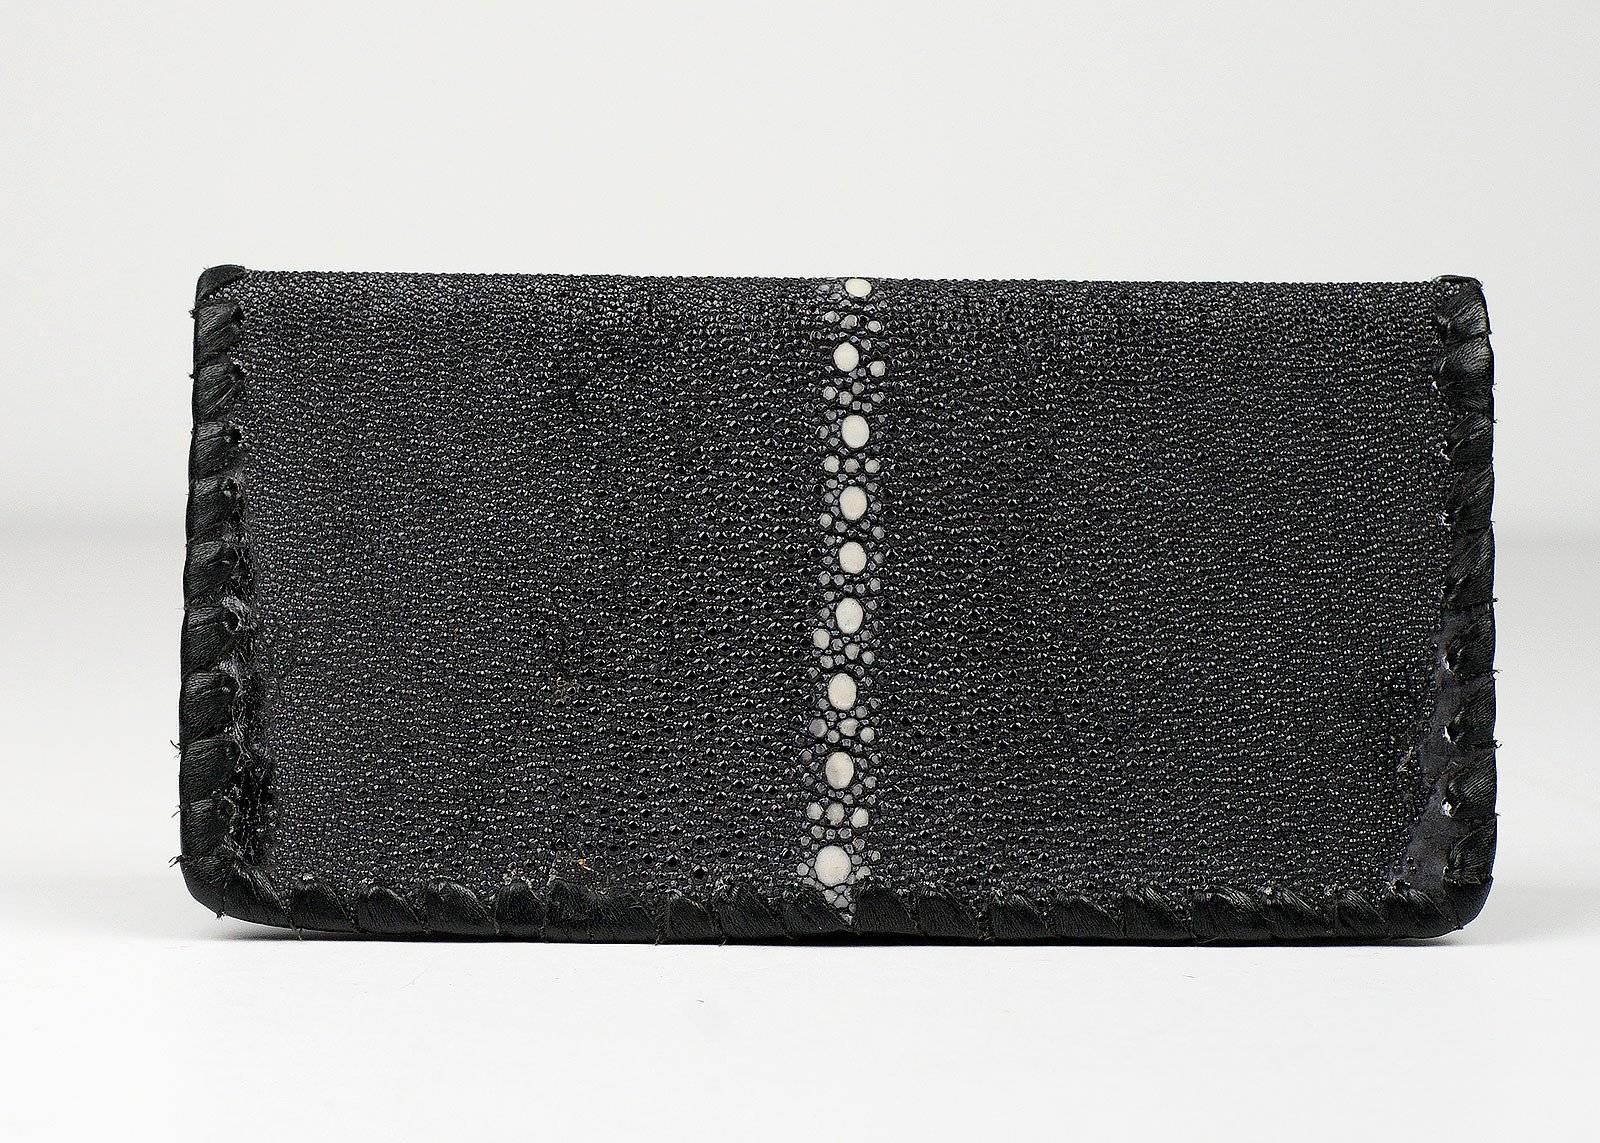 Artisan crafted black stingray leather custom made wallet.

Measurements: 7 inches tall, 3 inches wide 

New Condition: This wallet is new and was never used.